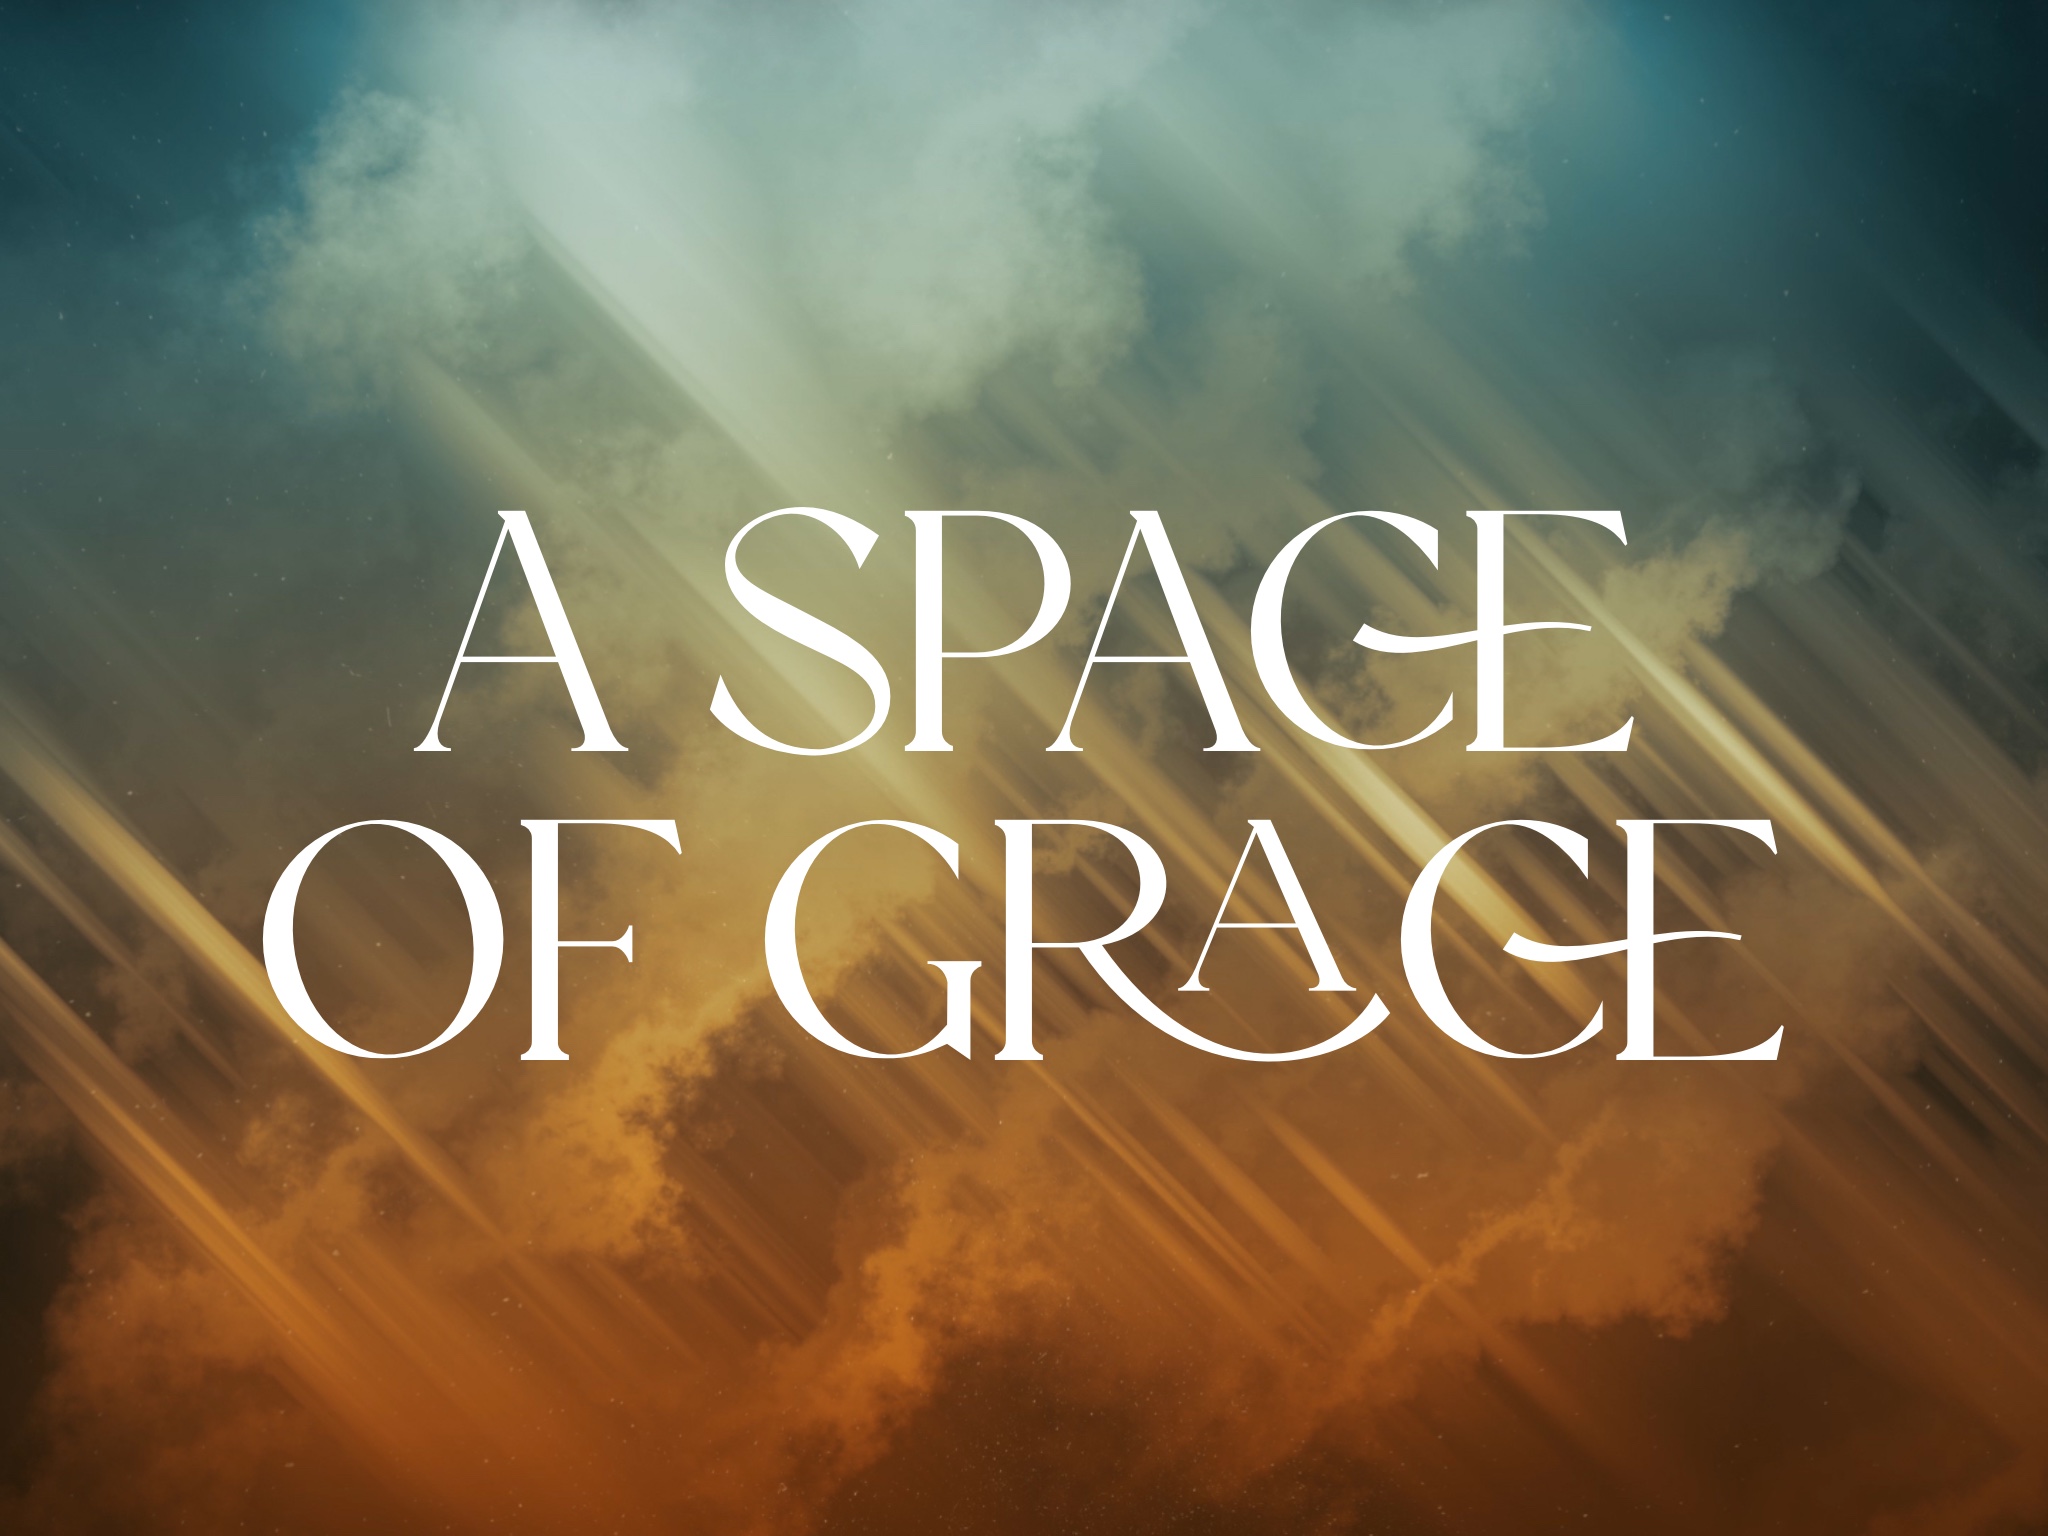 A Space of Grace